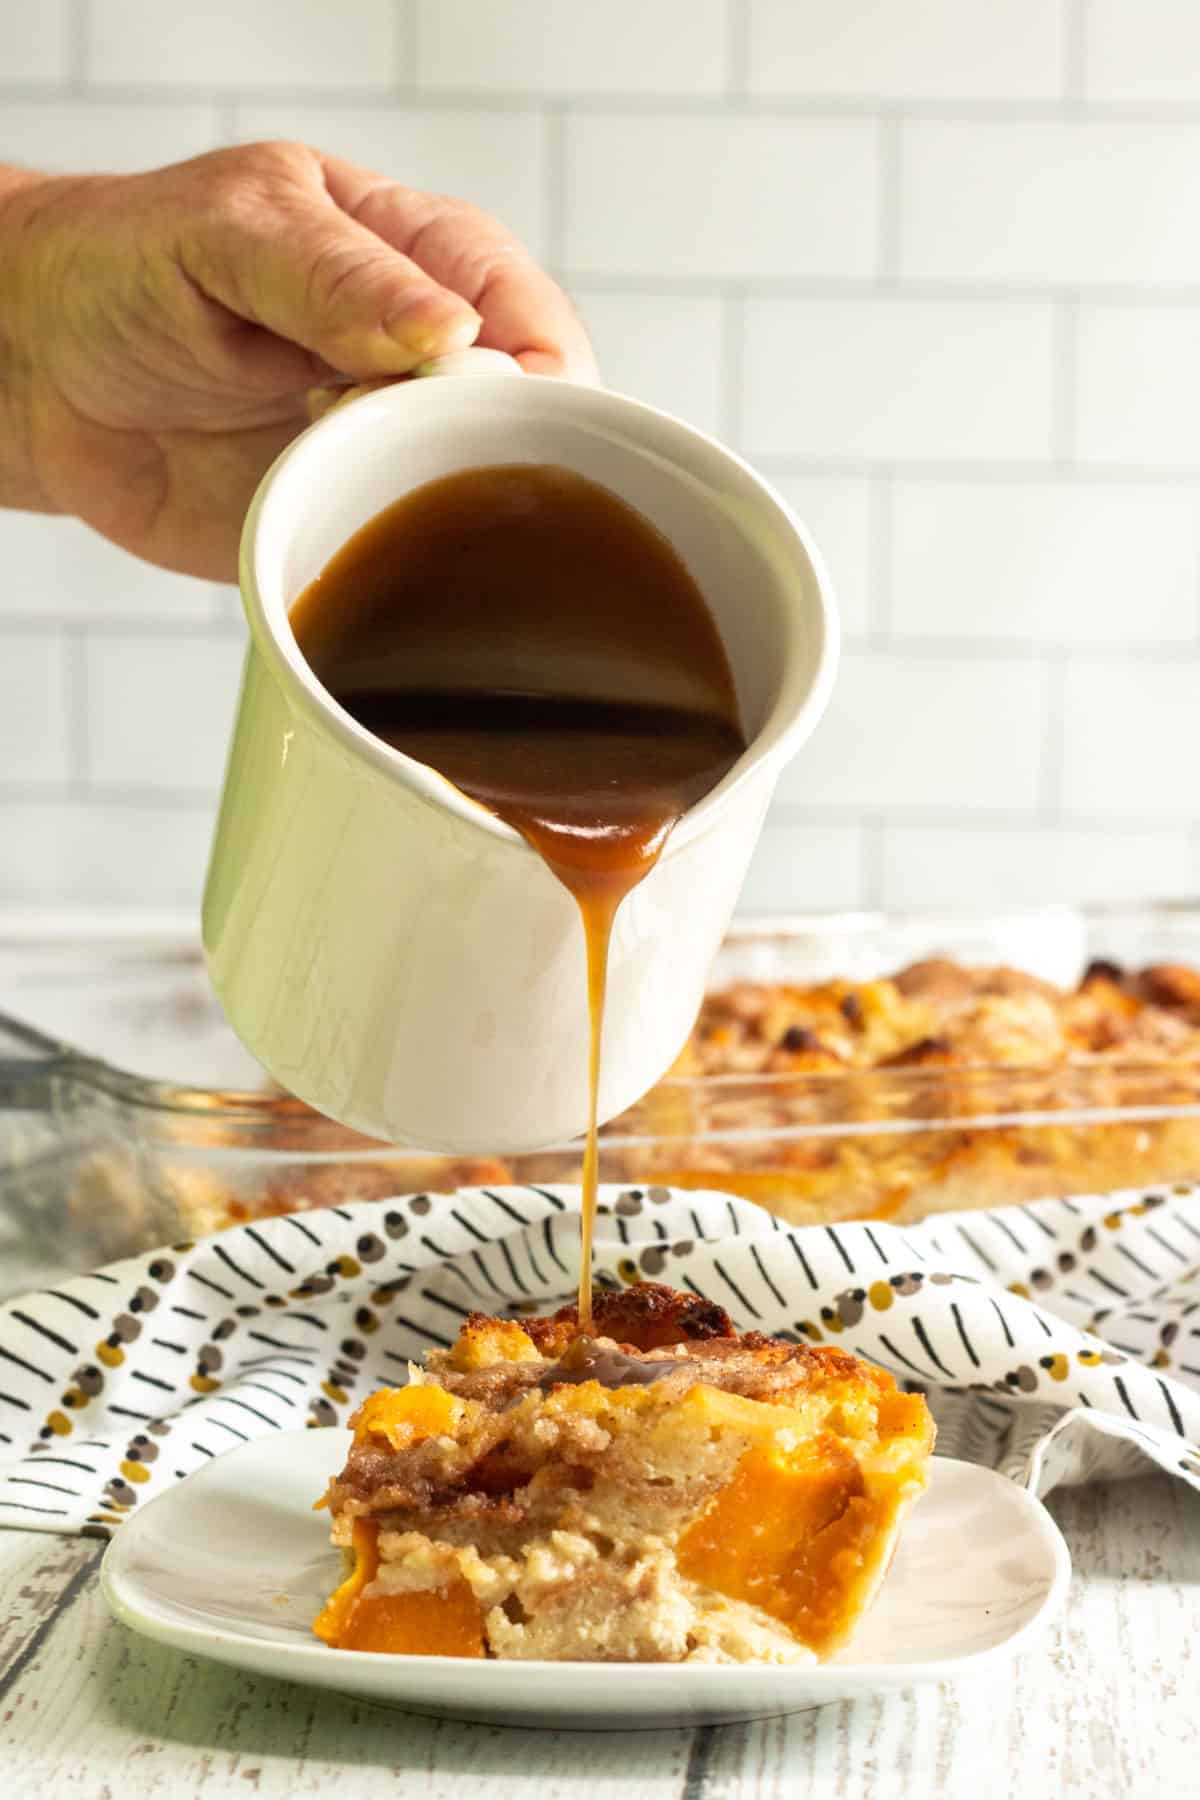 maple sauce being poured on sweet potato bread pudding